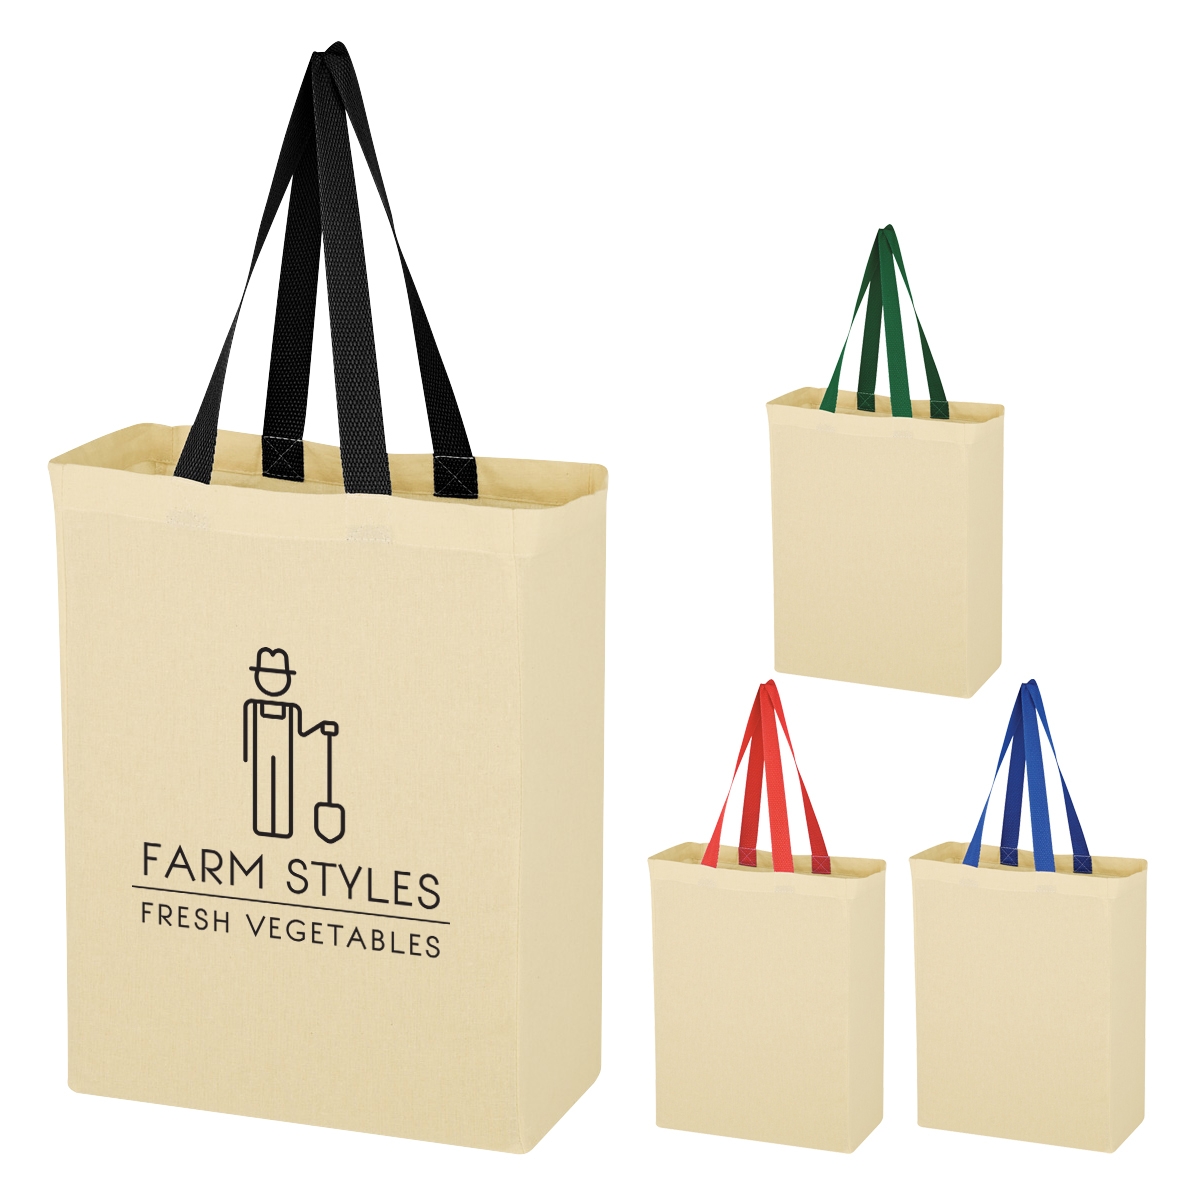 Promotional Natural Cotton Canvas Grocery Tote Bag | Customized Natural Cotton Canvas Grocery ...